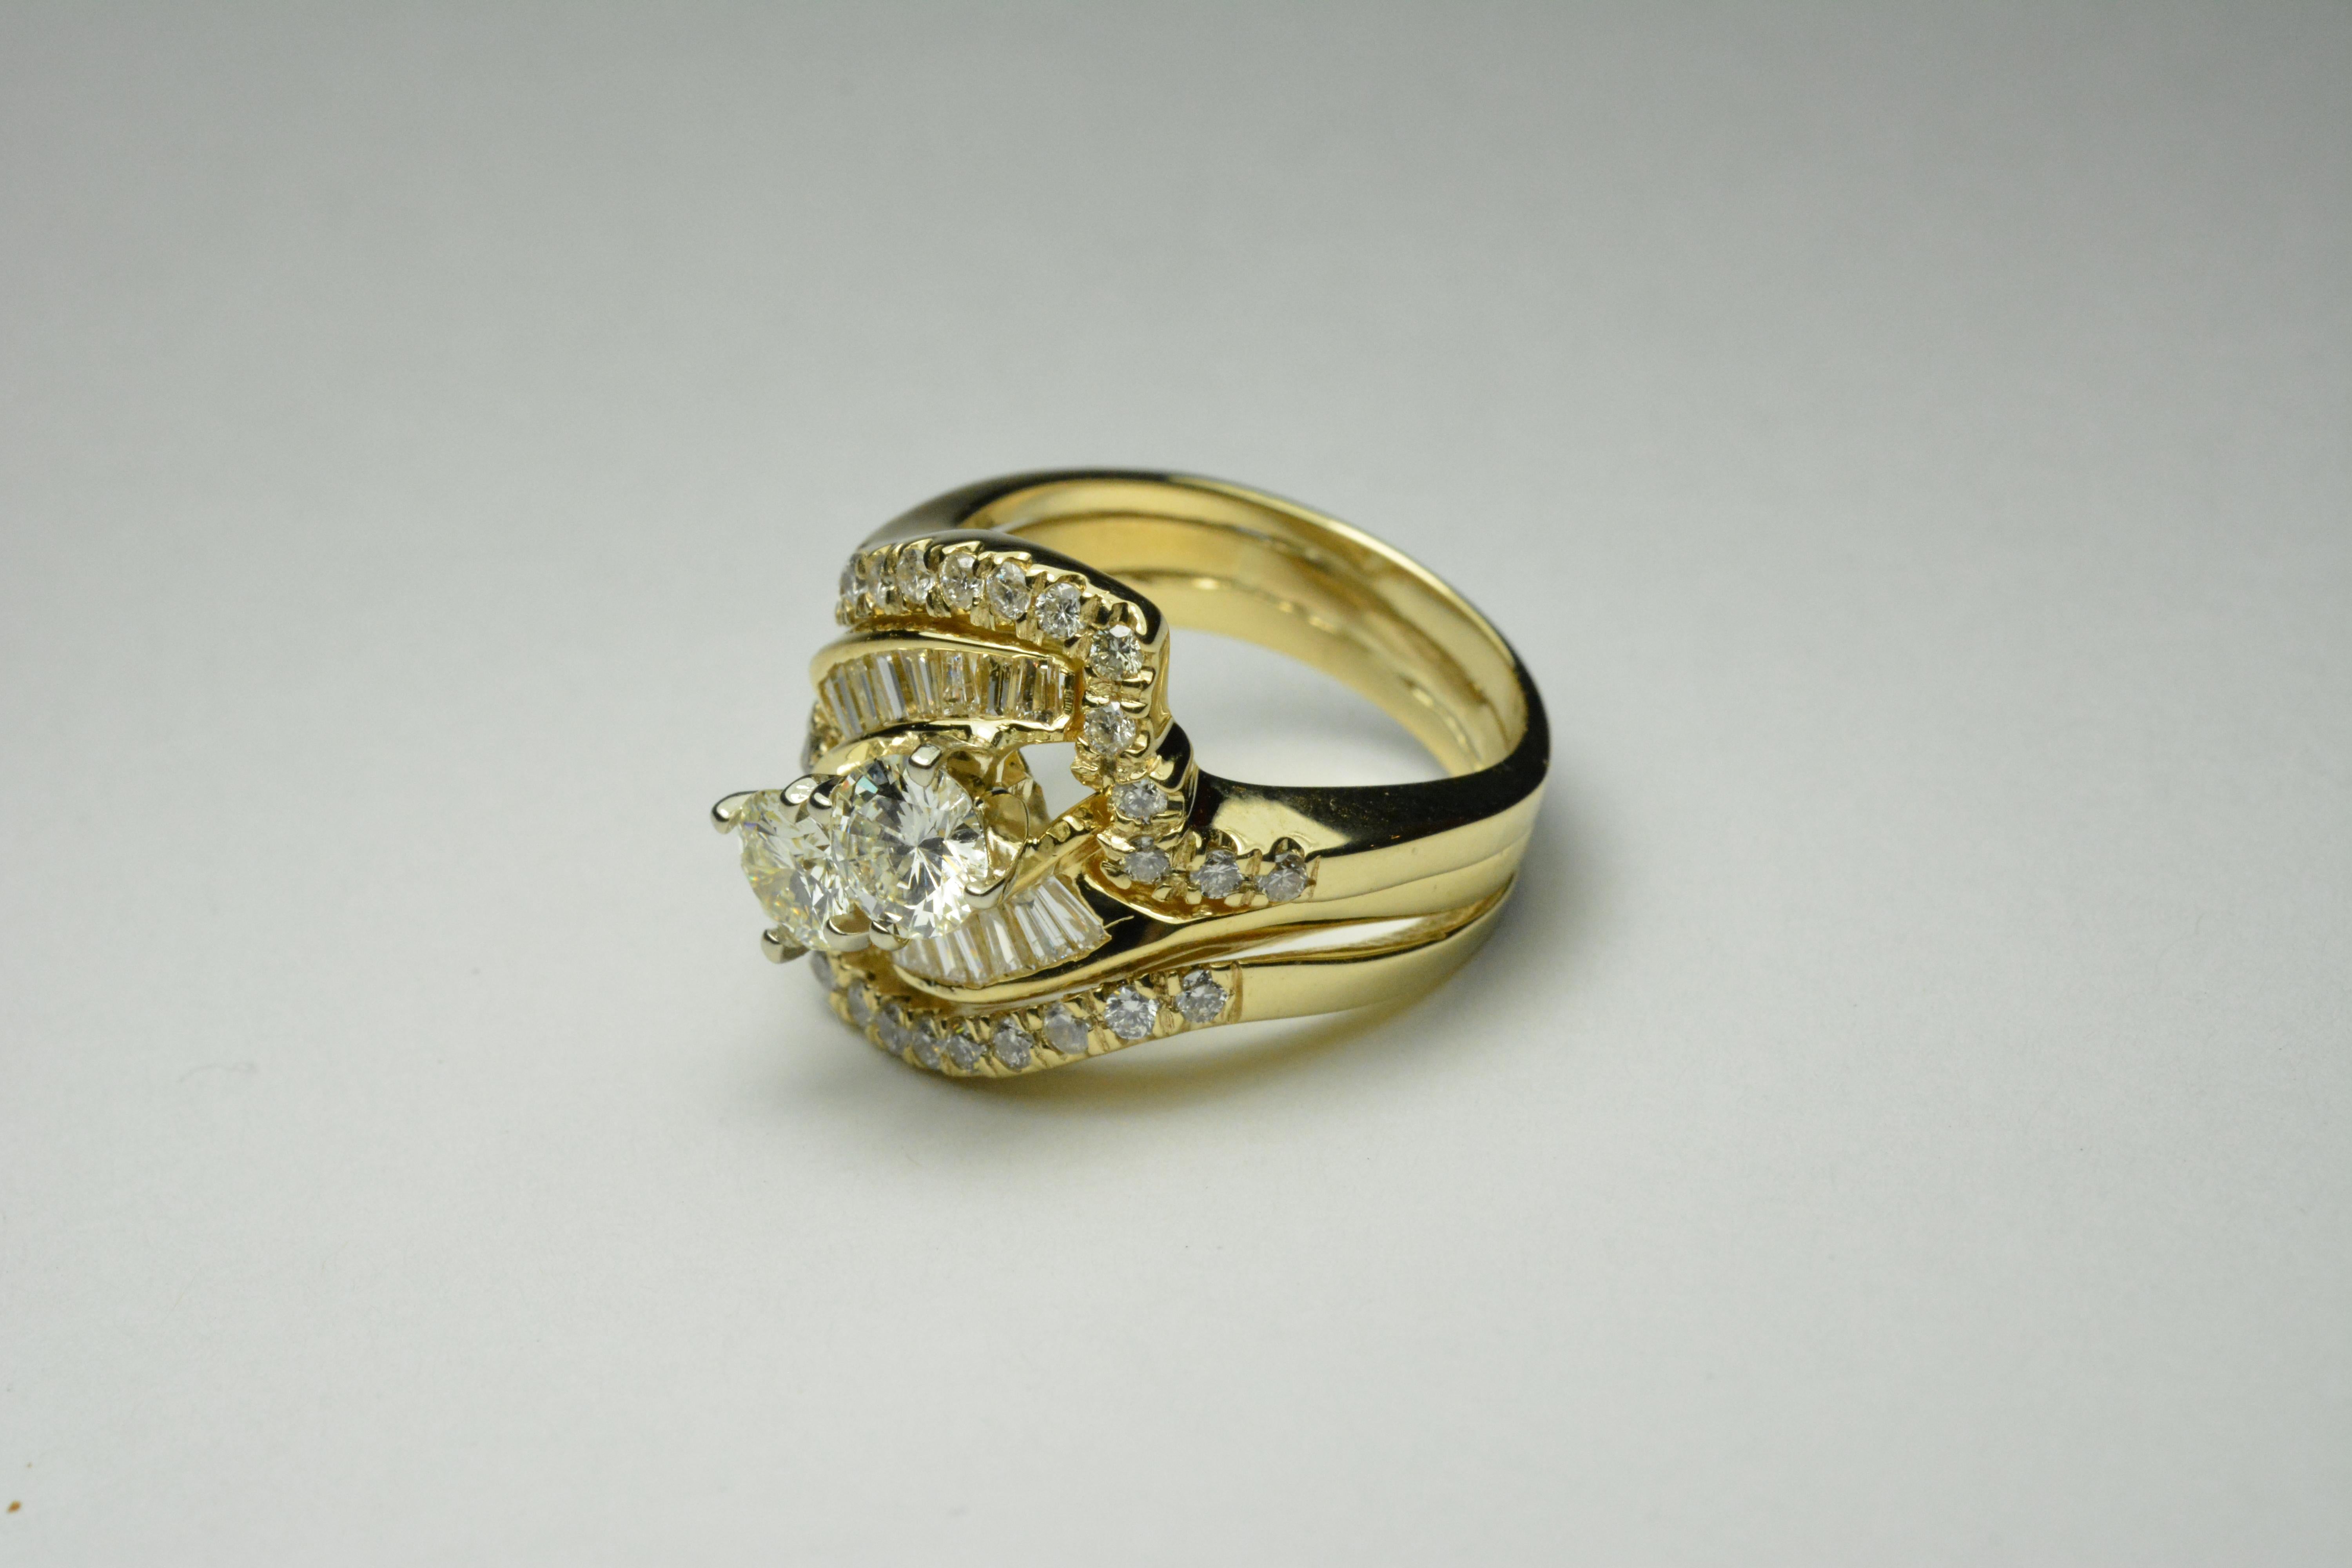 Ladies 18 Karat Yellow Gold Diamond Ring 2.80 Carat Total Diamond Weight In Excellent Condition For Sale In Laguna Beach, CA